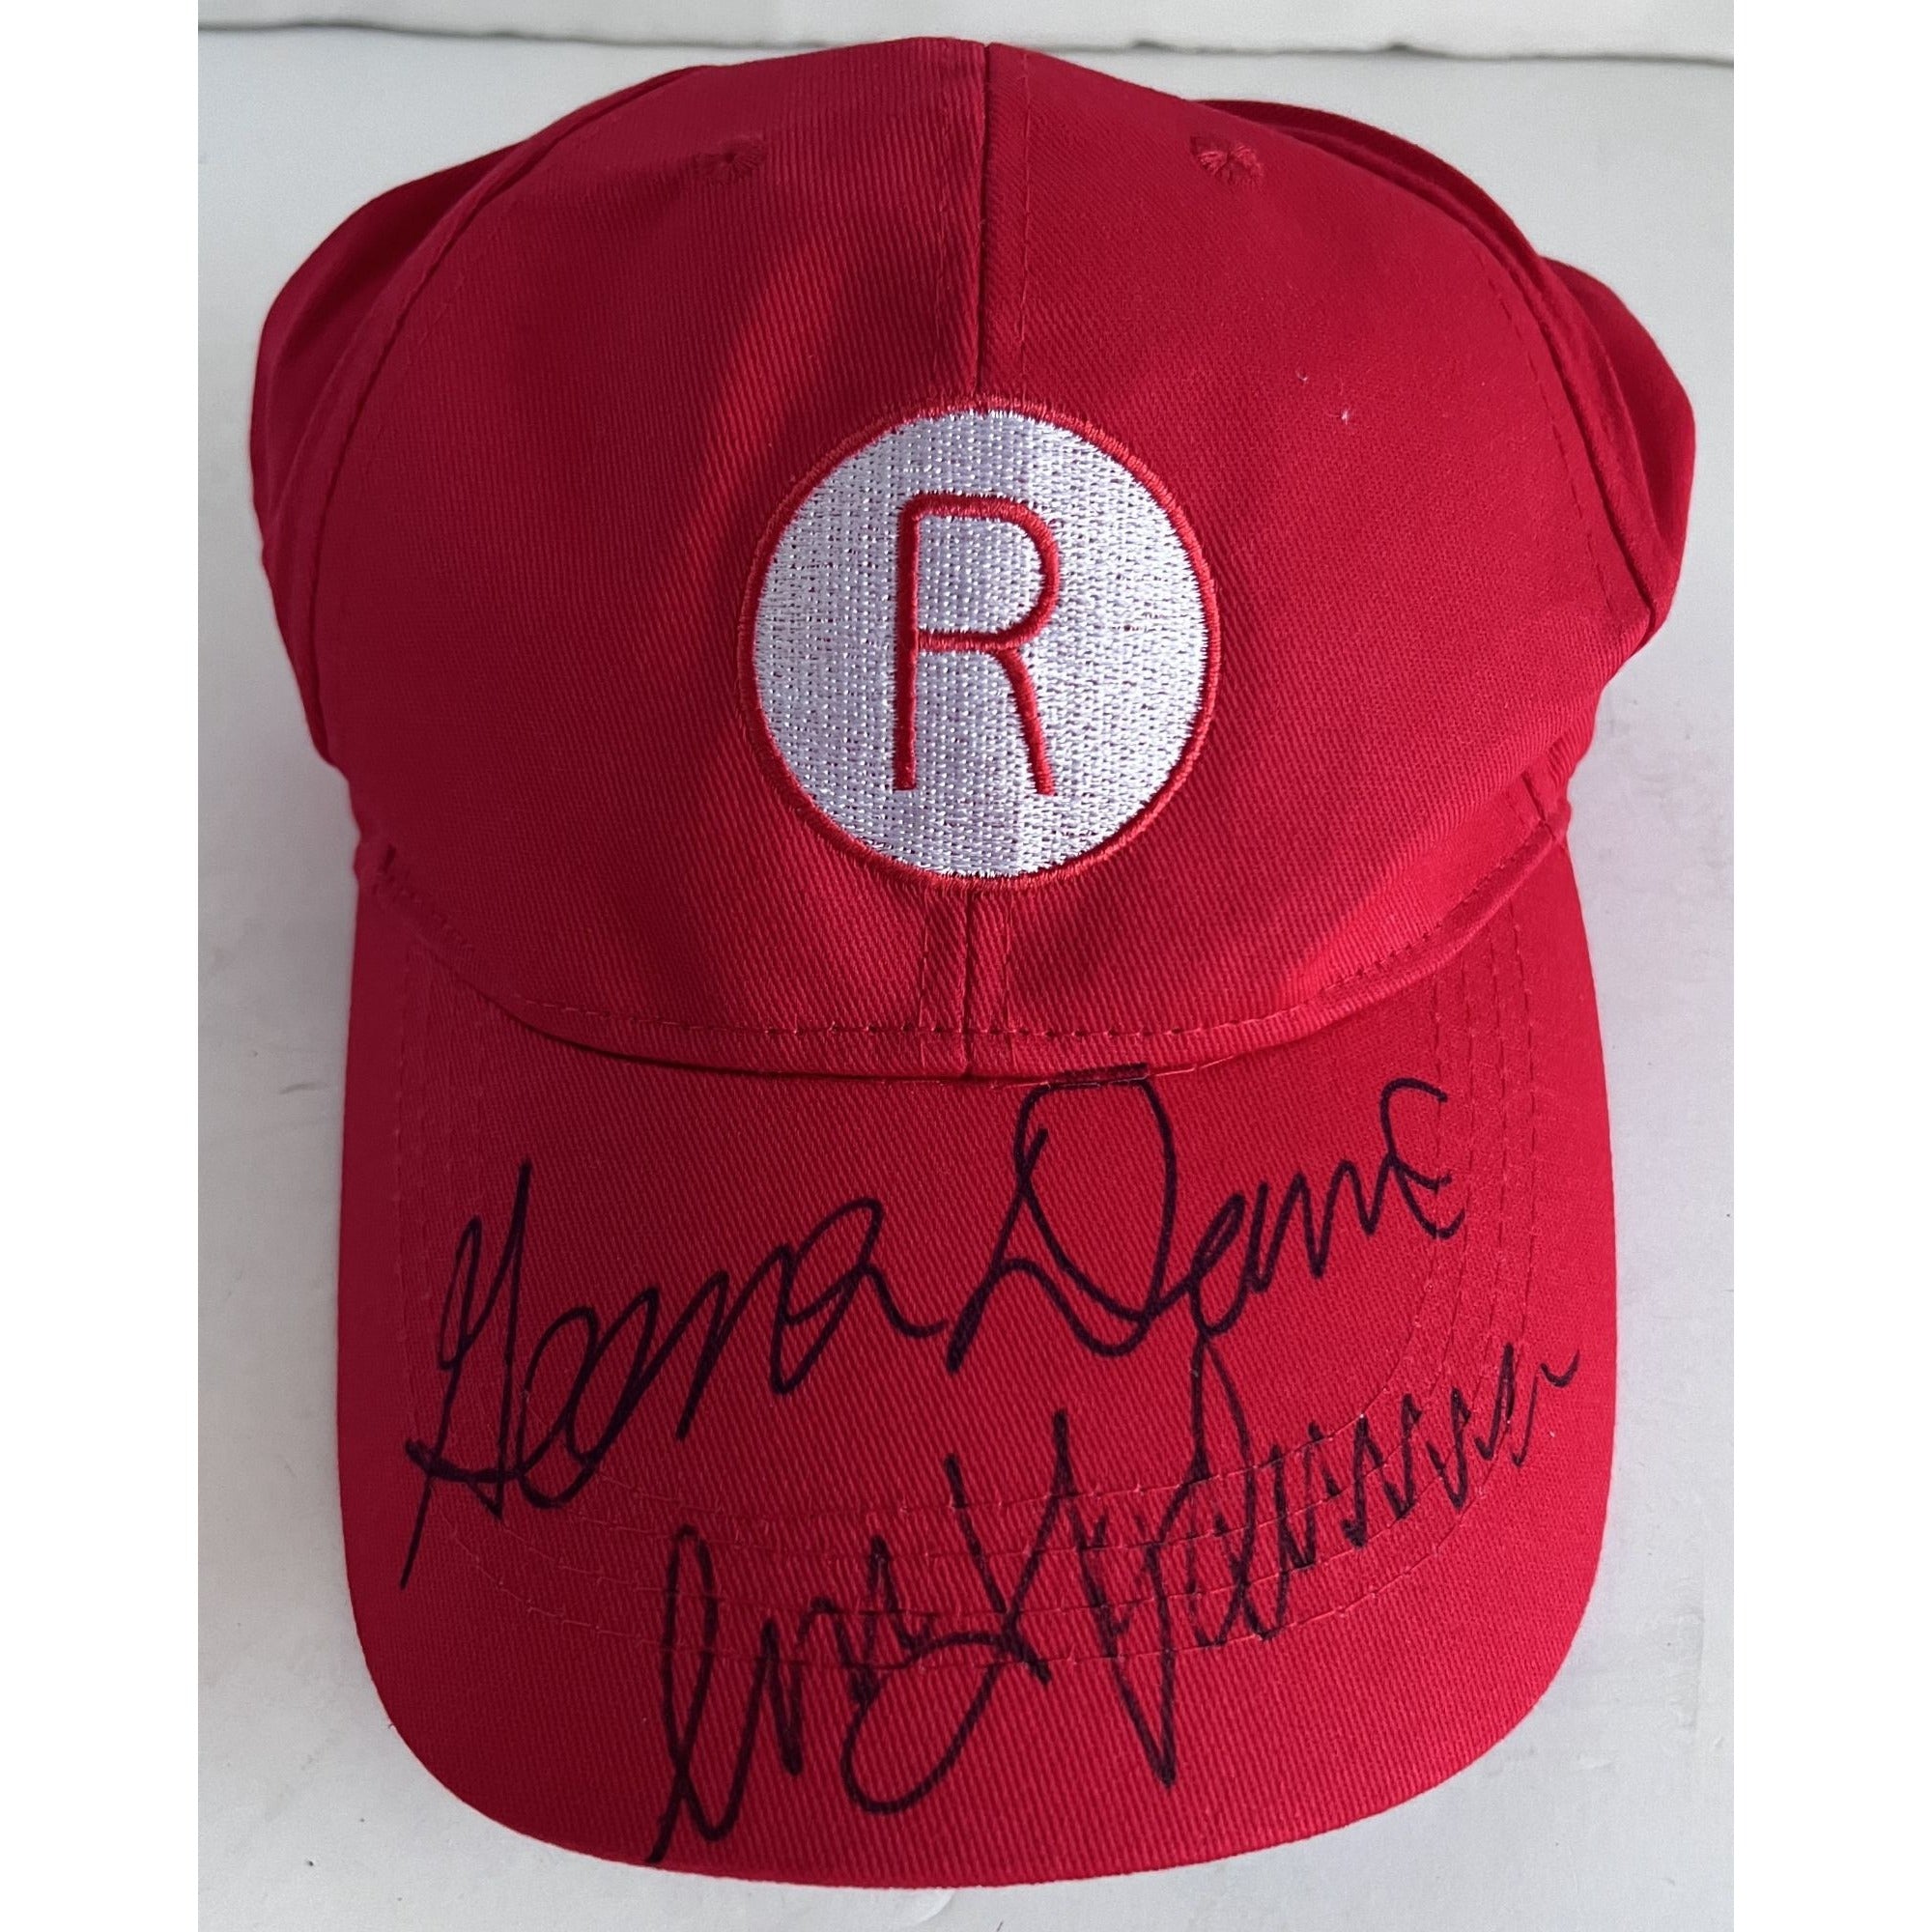 "A League of Their Own "  Rockford Peaches, authentic baseball cap signed with proof Gena Davis and Madonna Ciccone